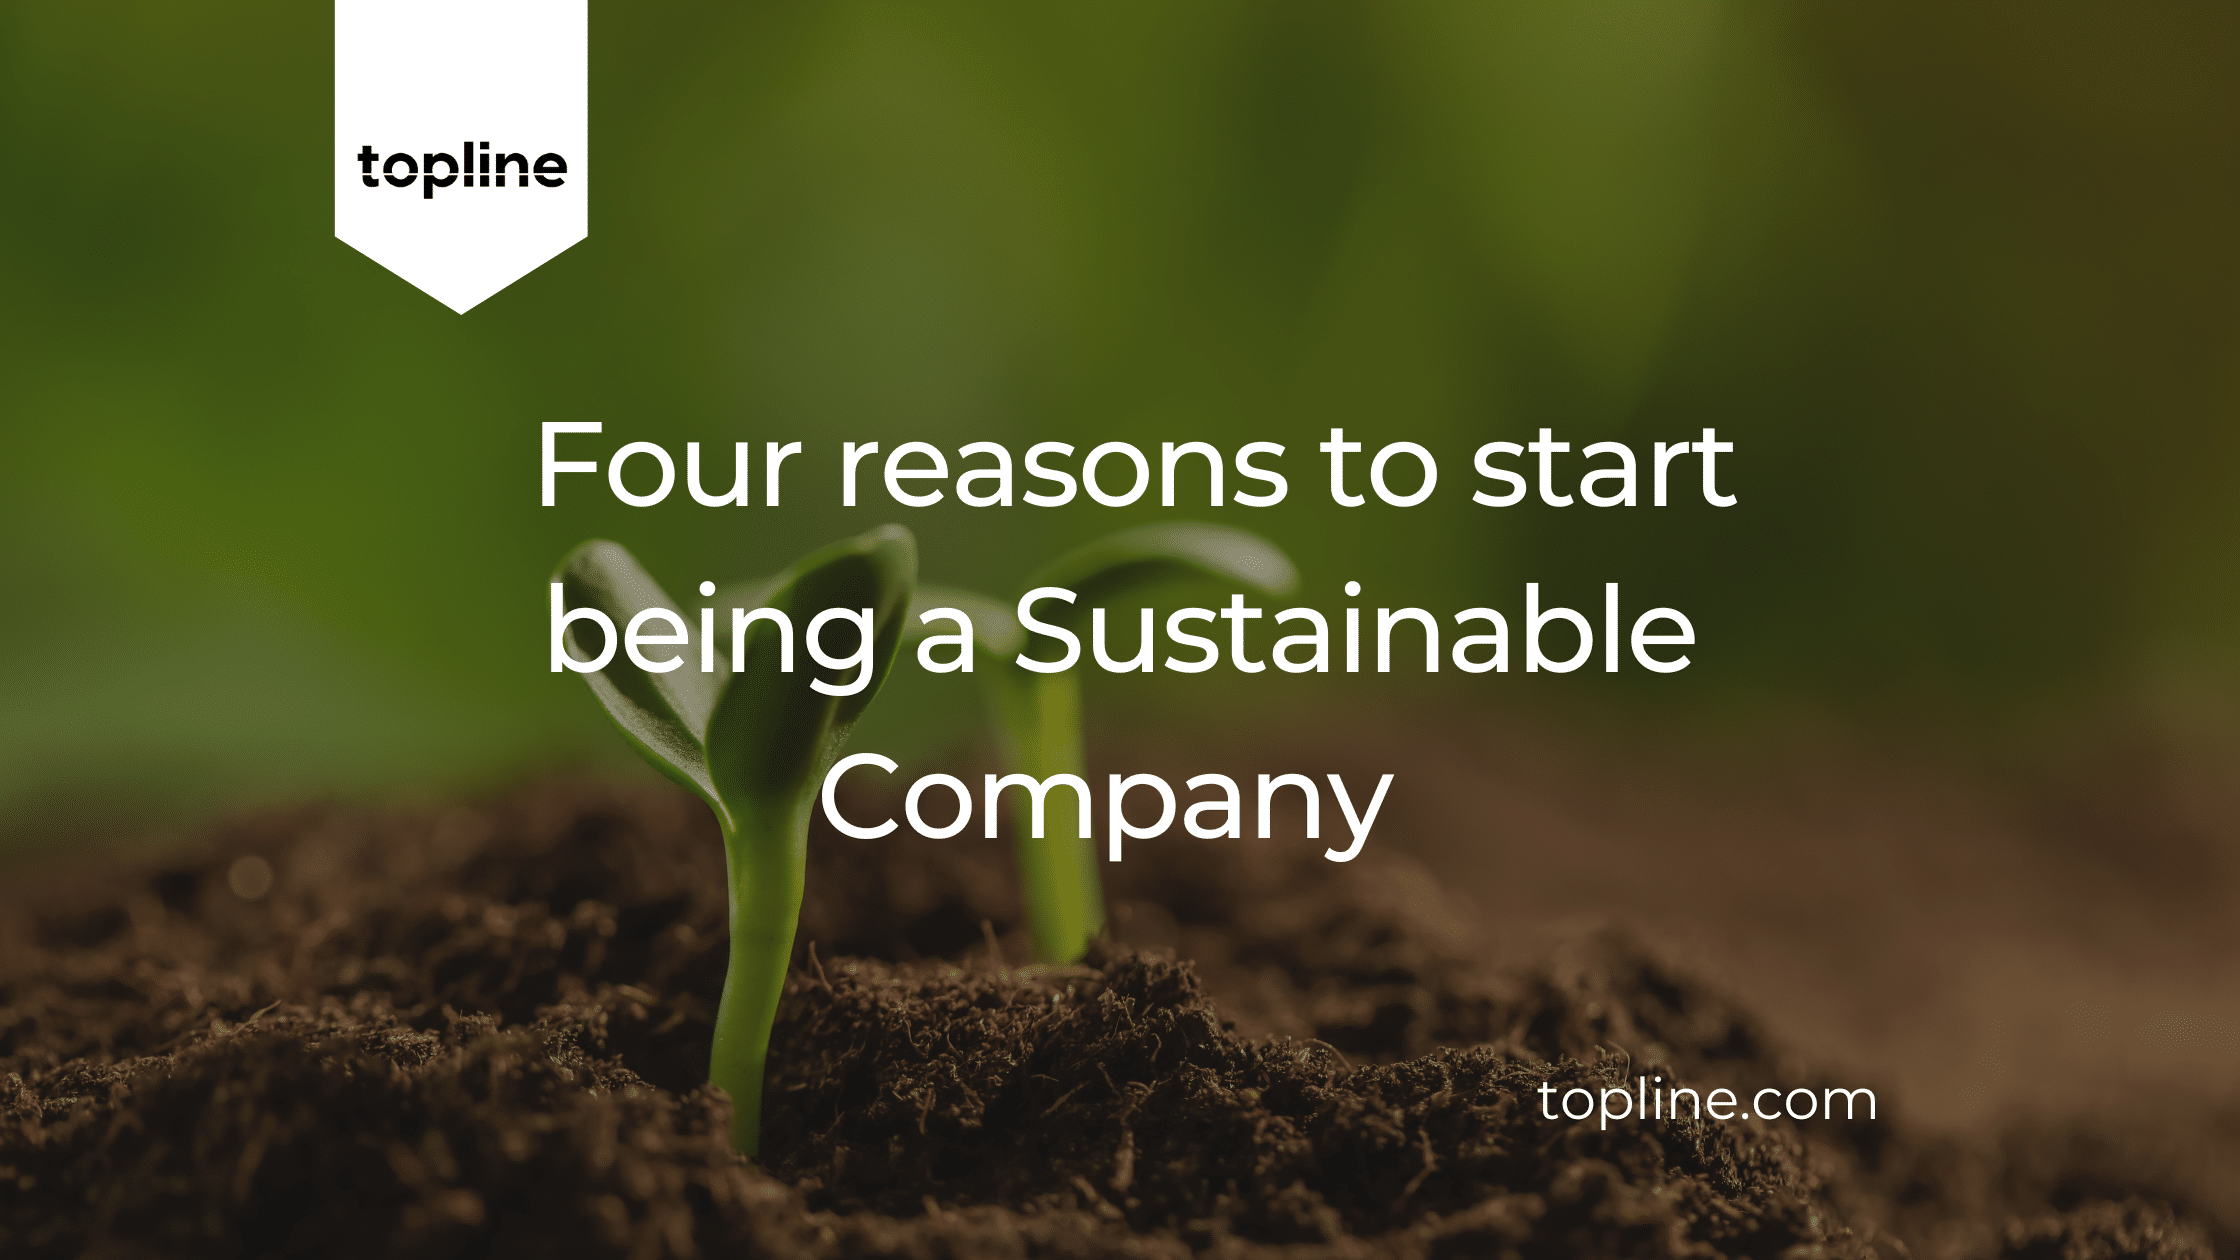 4 reasons to start being a sustainable company